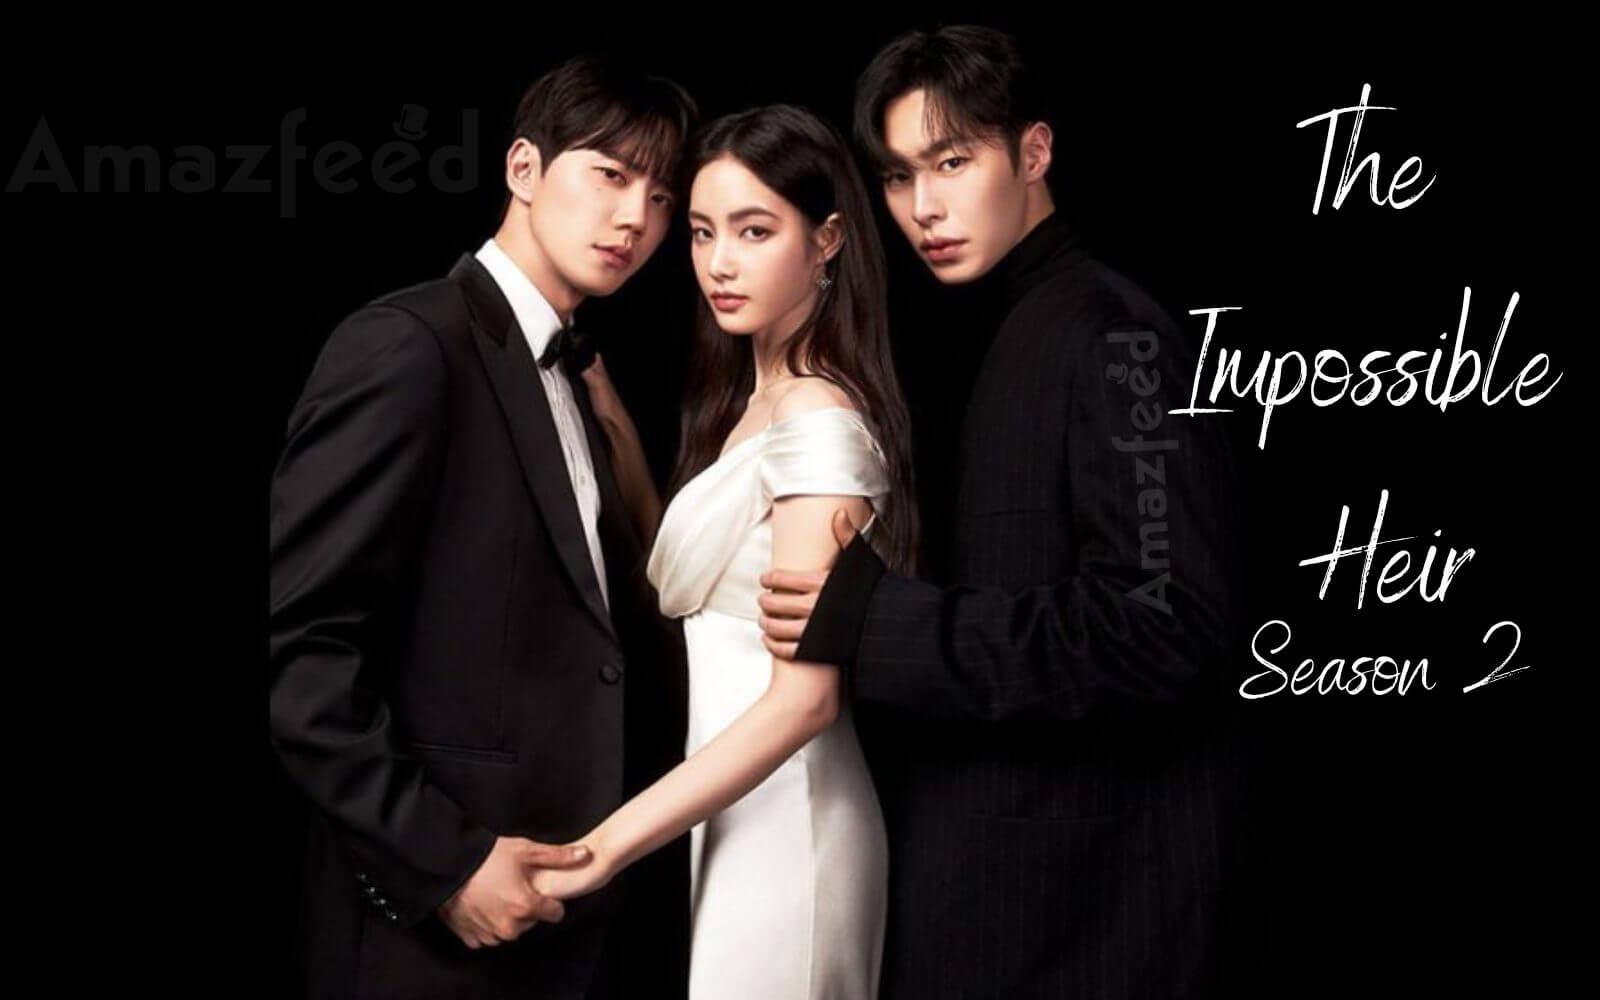 The Impossible Heir Season 2 release date